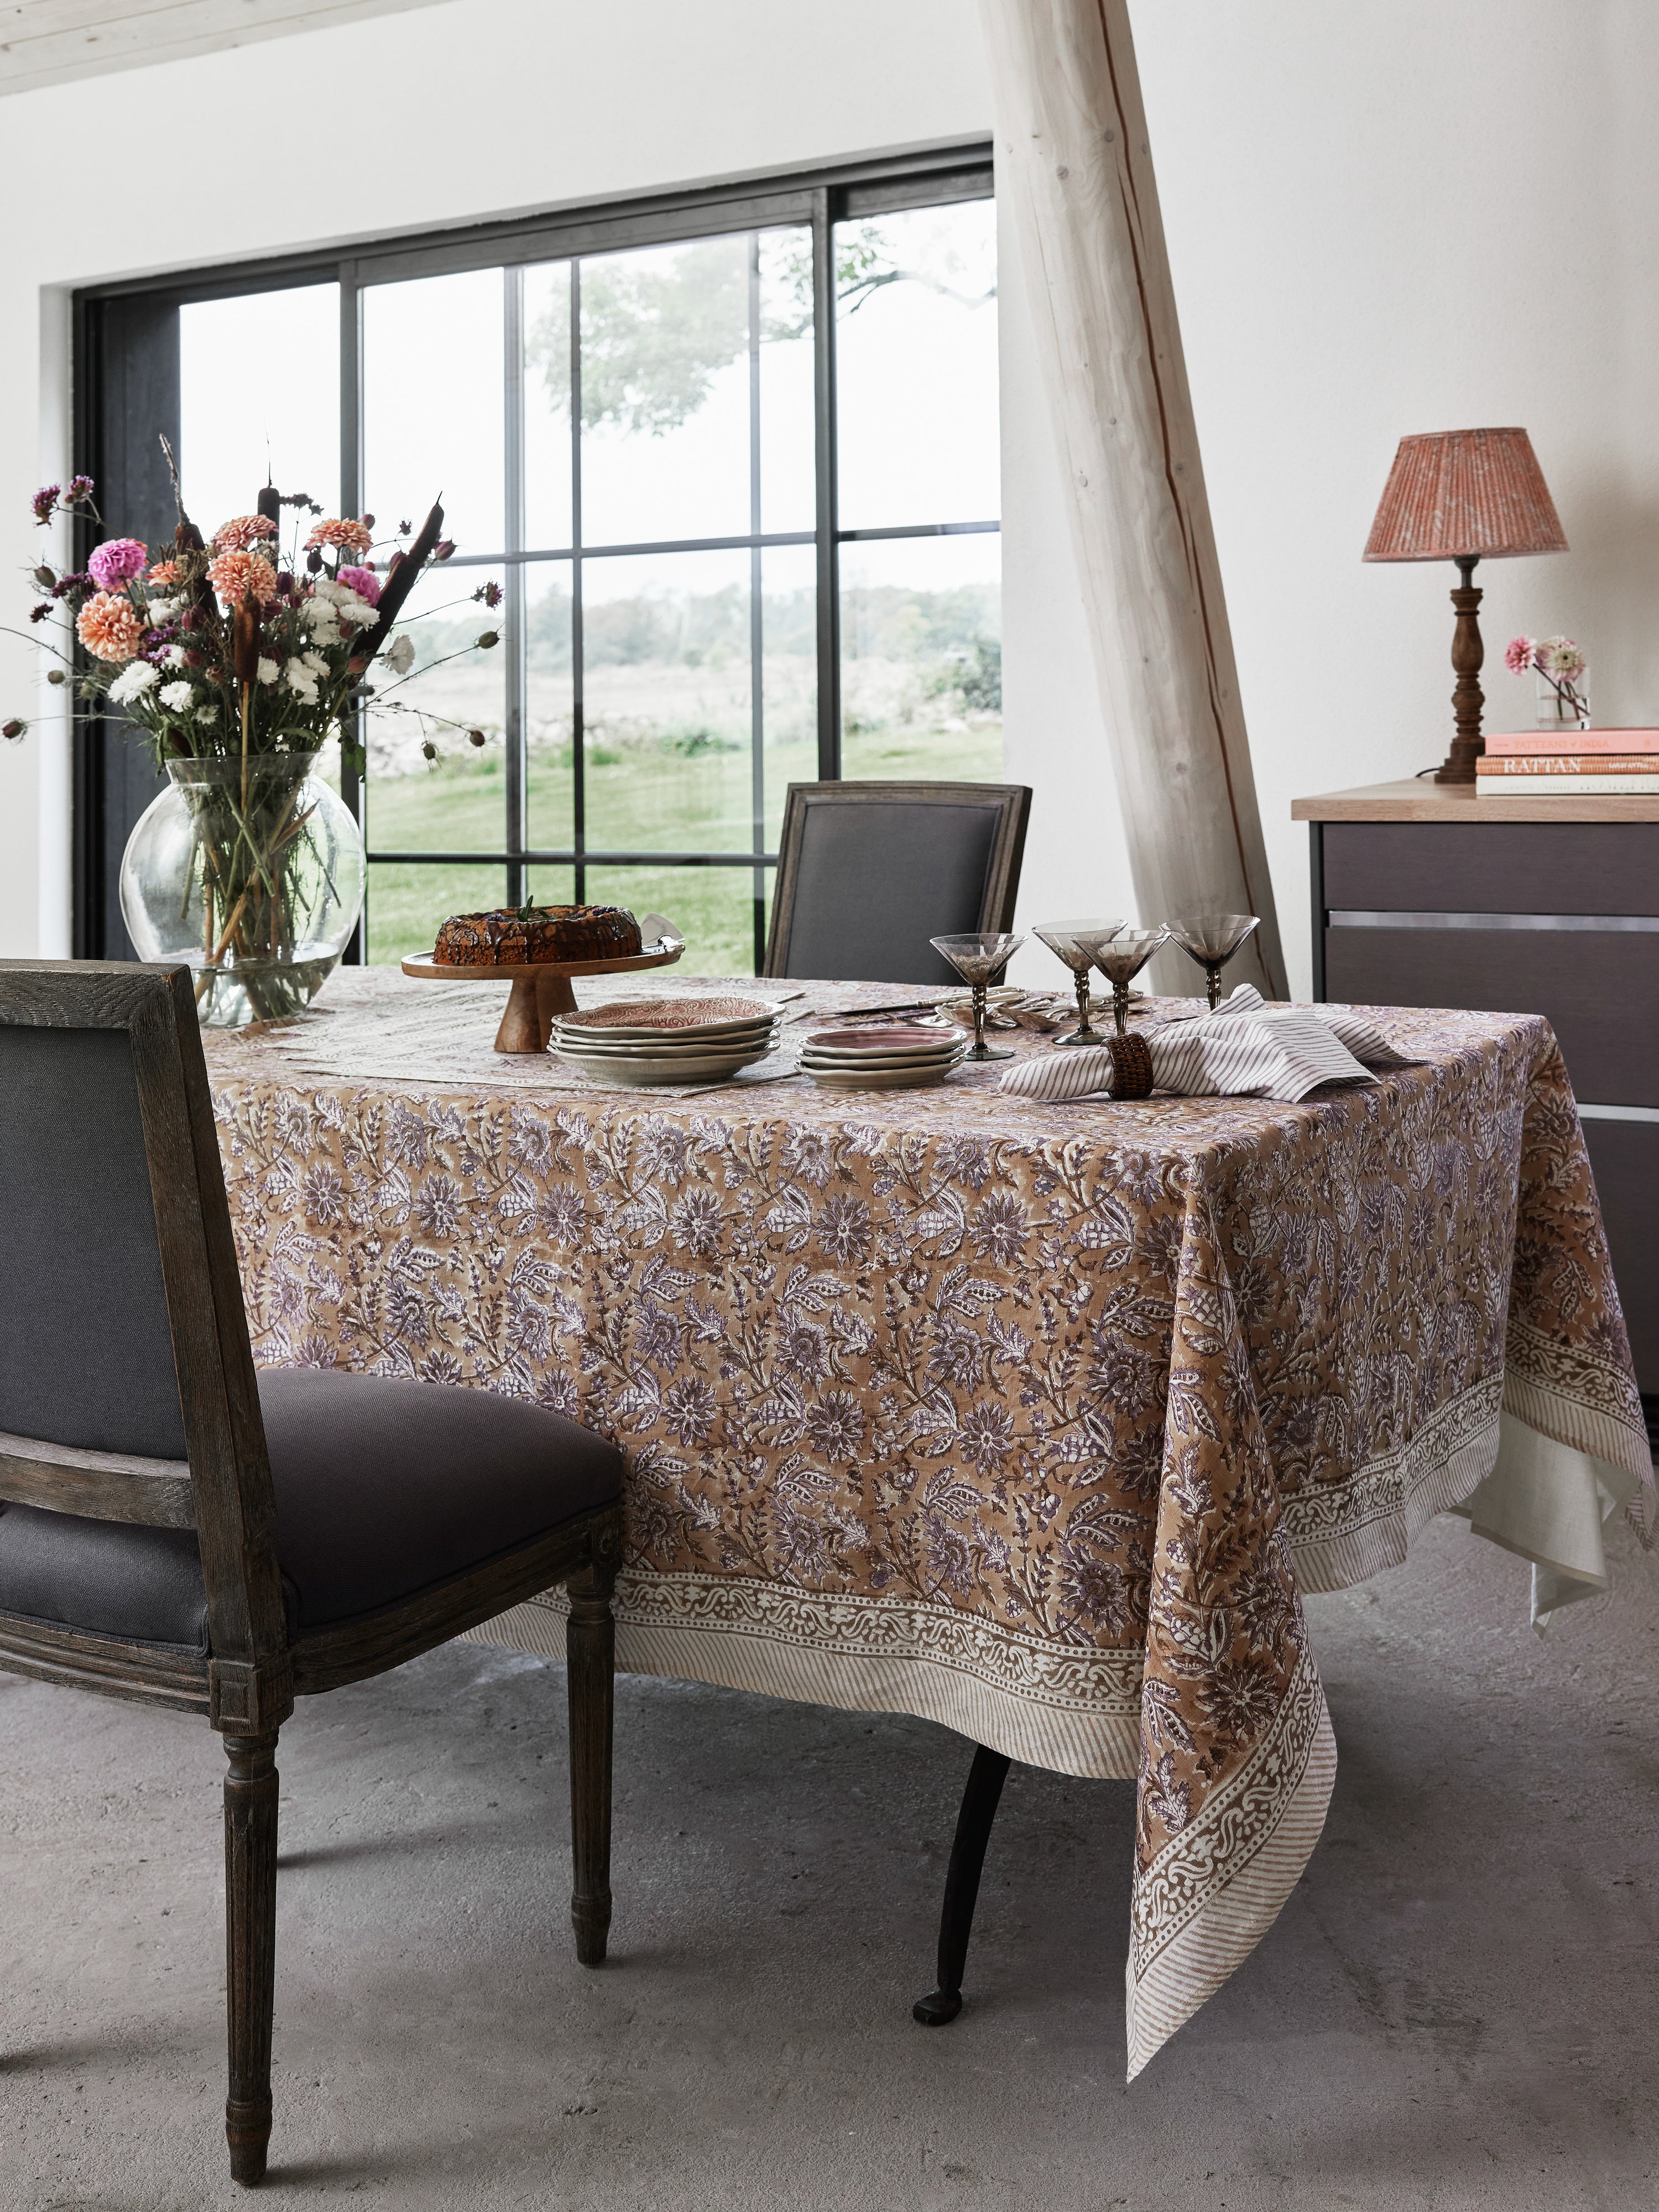 Linen tablecloth with Indian Summer print in Beige/Lavender